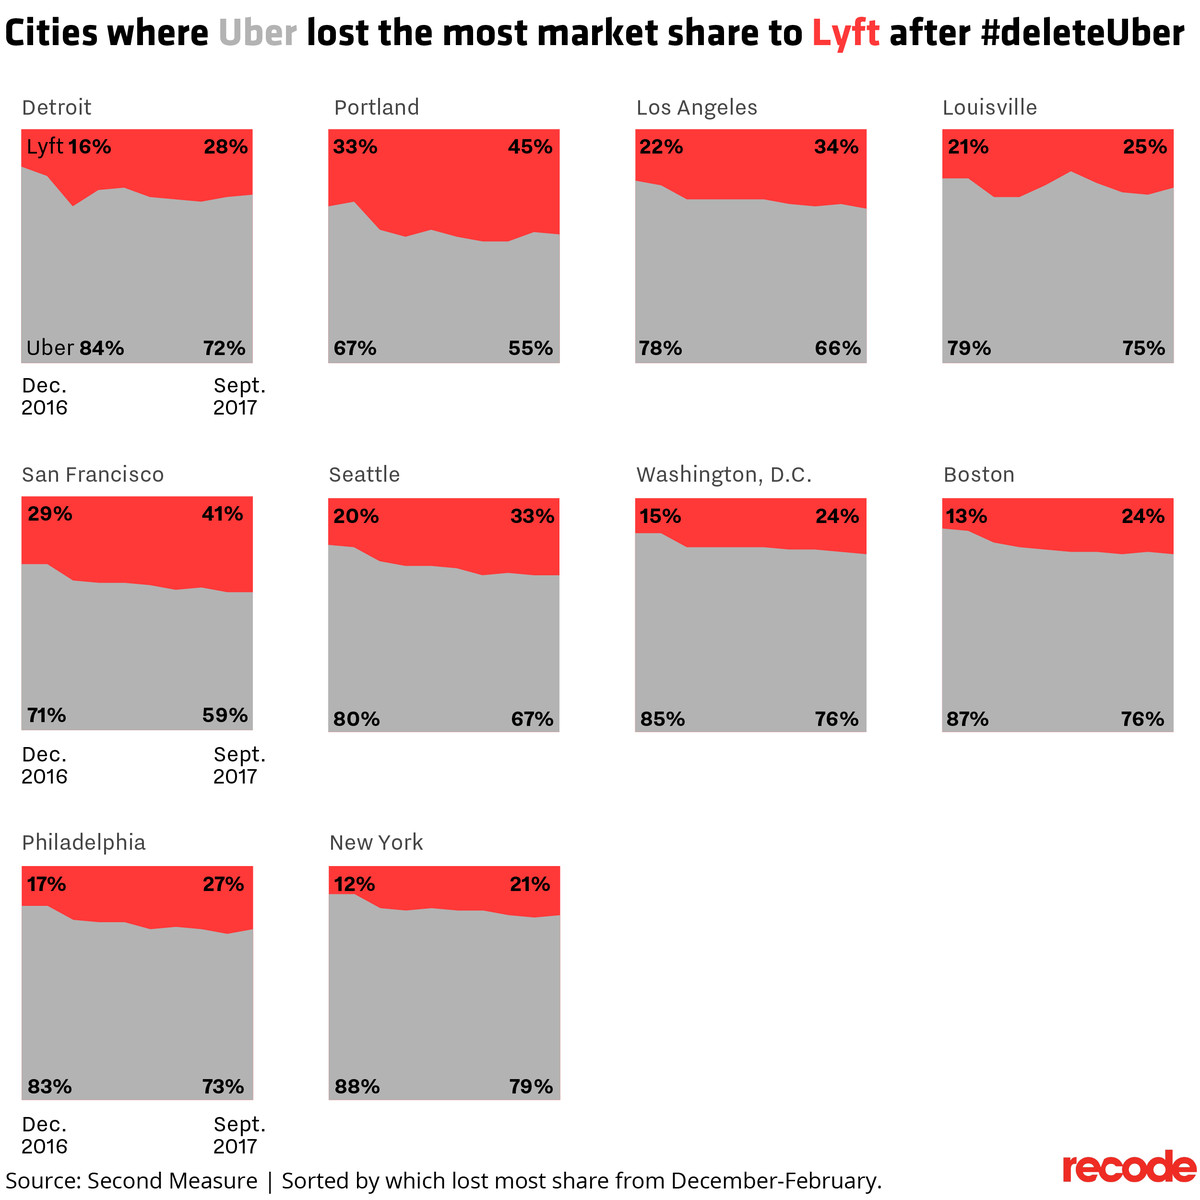 Cities where Uber lost the most market share to Lyft after #deleteUber